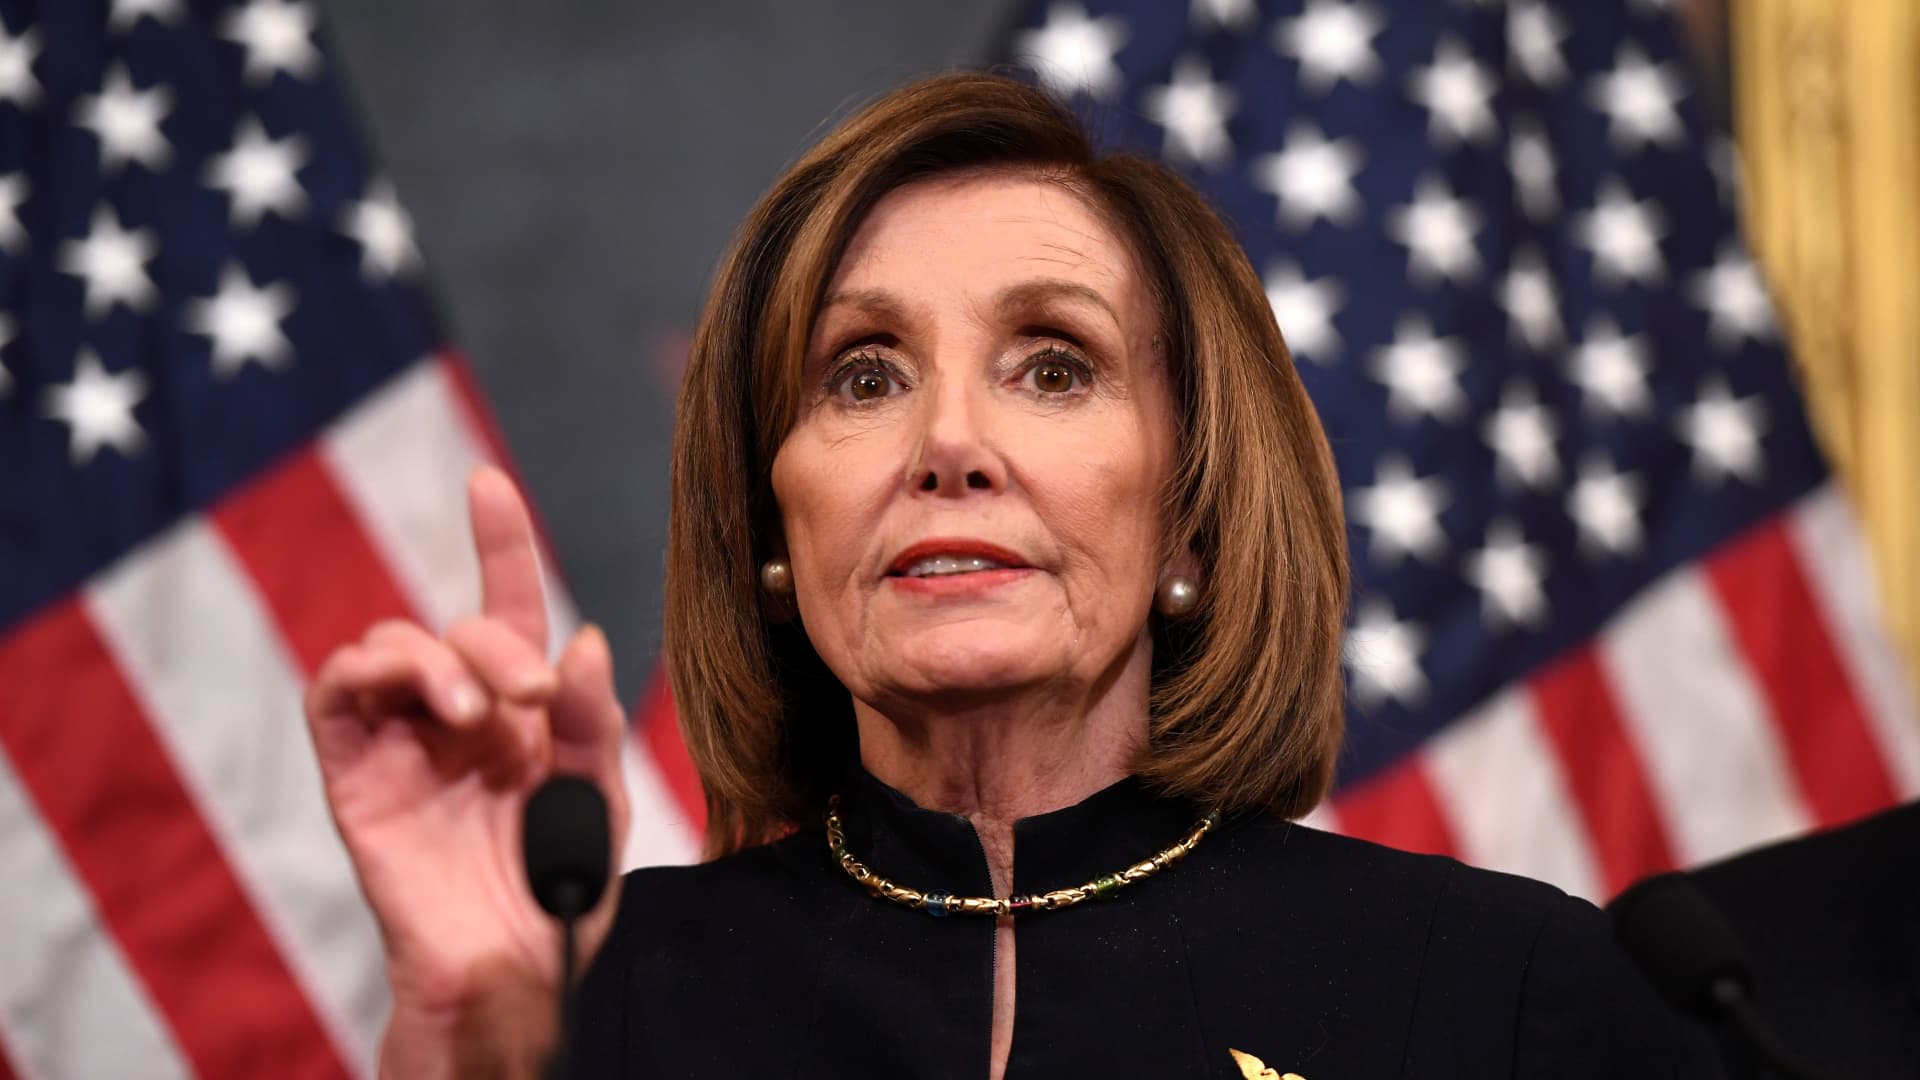 Pelosi's best move might be to keep impeachment in her pocket and not send it to the Senate